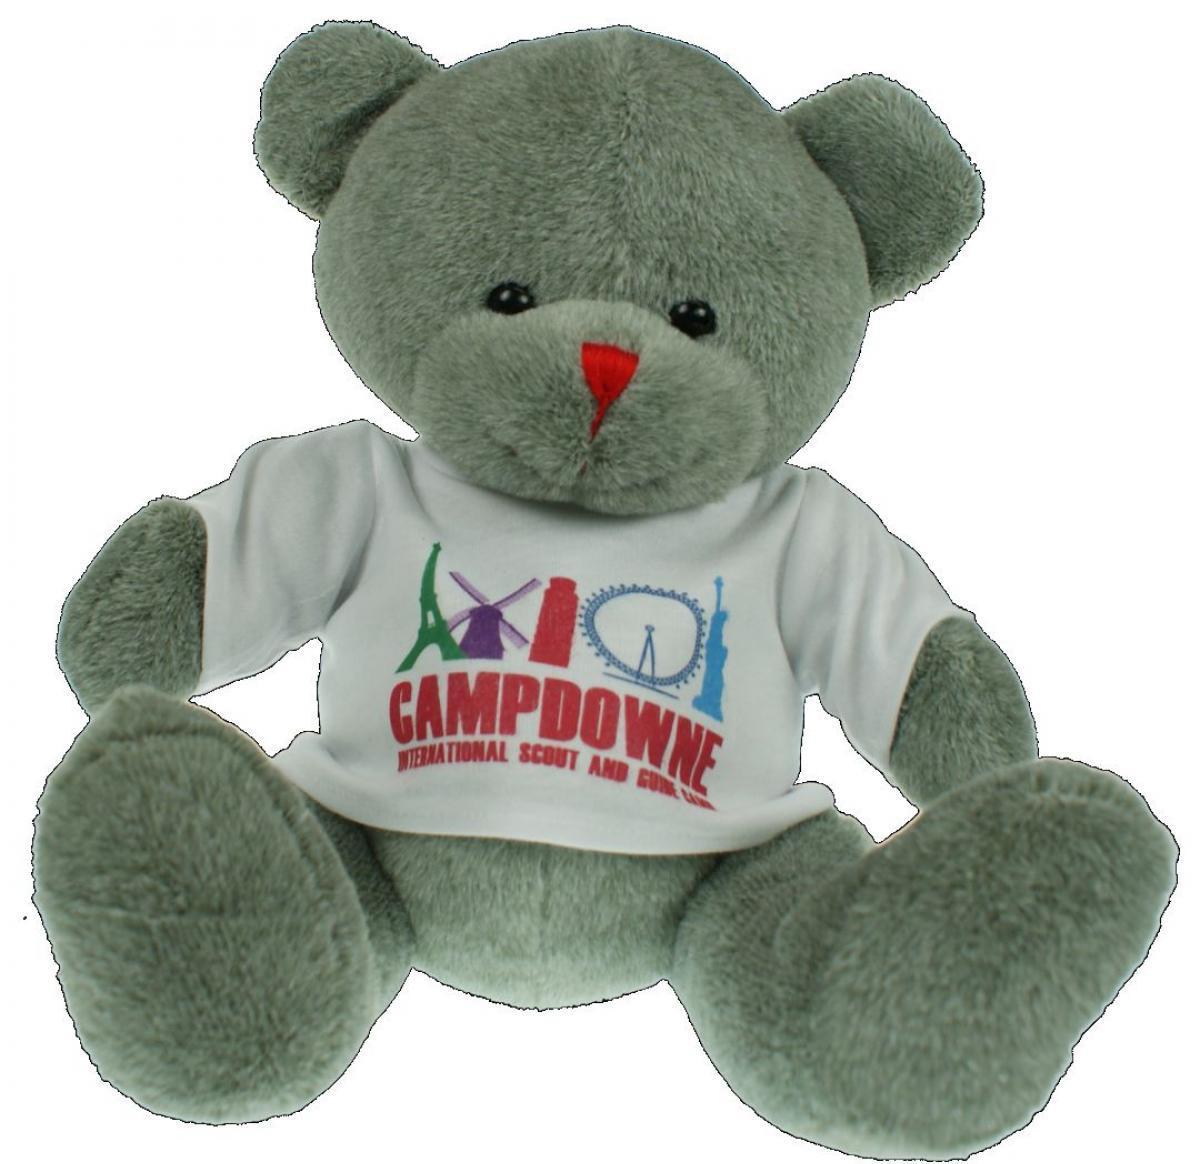 Red and Bear w Logo - 25cm Red Noe teddy bear with logo t-shirt - Buy Promotional Products ...